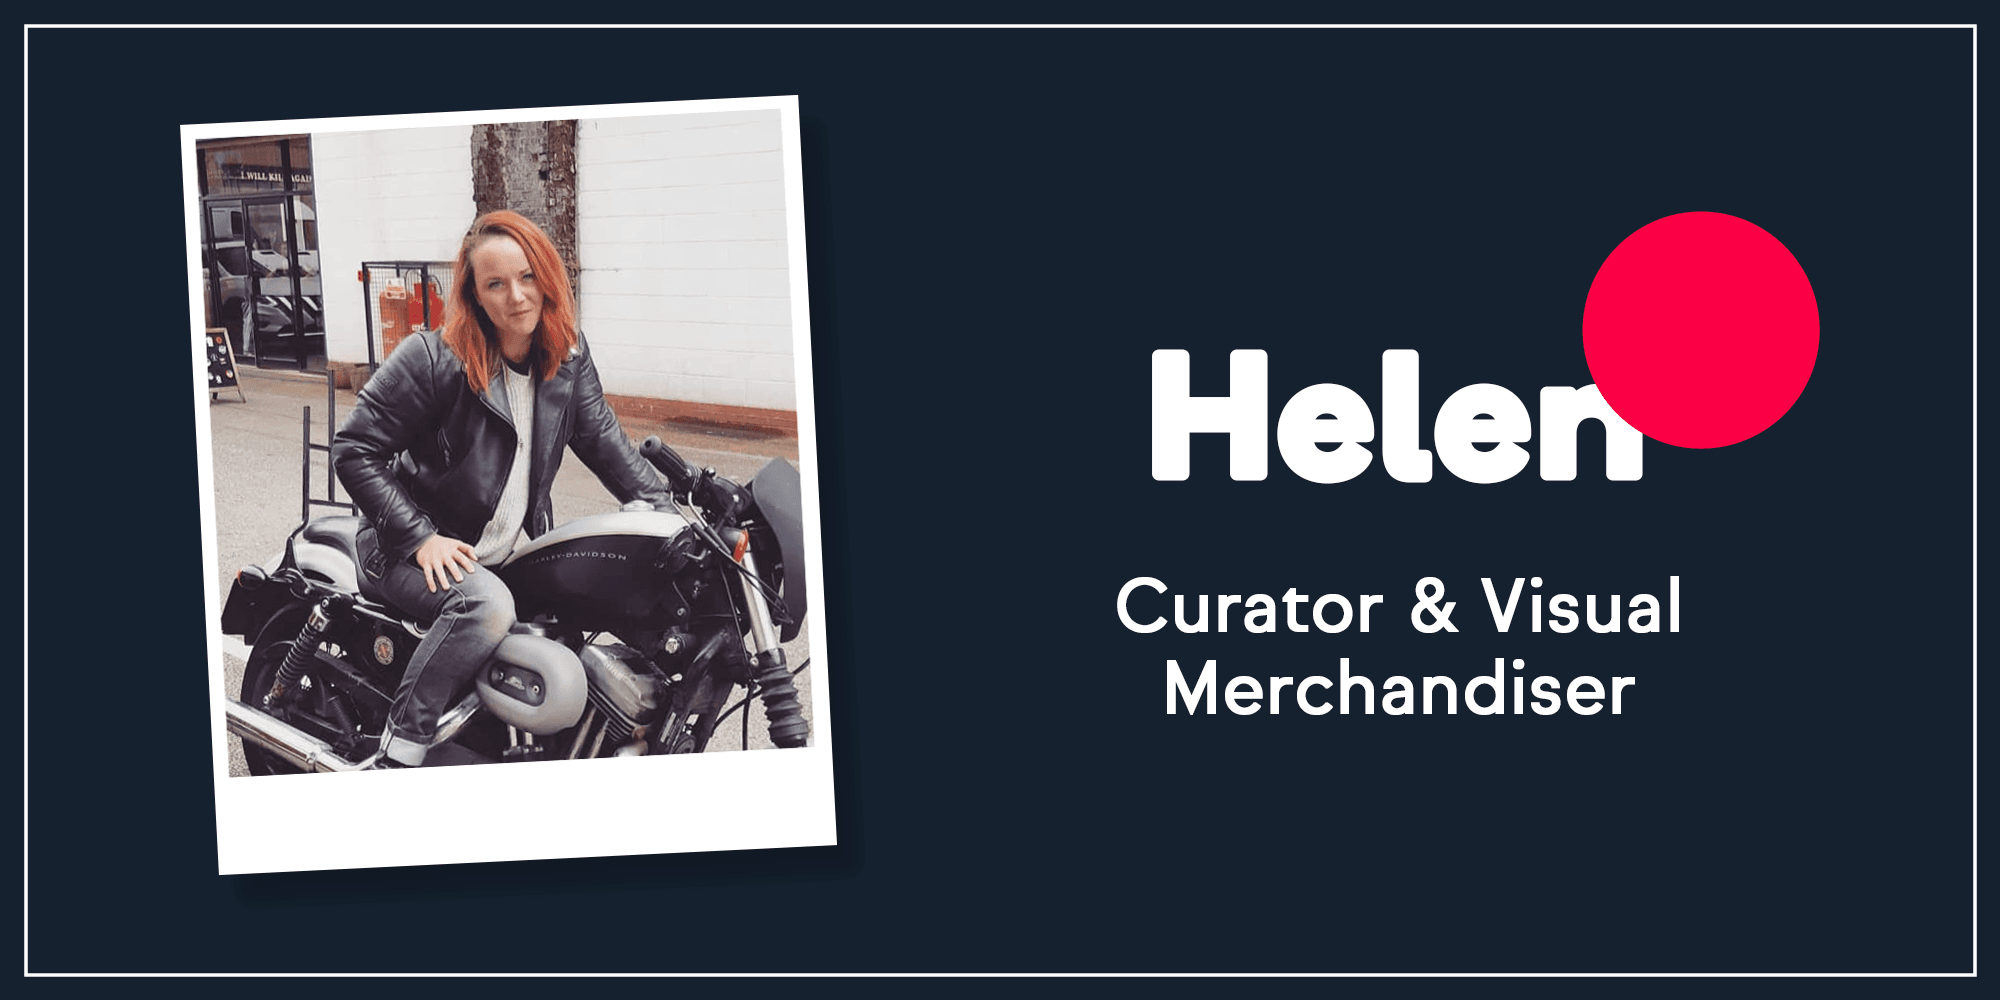 Get to know our team with our new Q&A feature. Today we meet Helen, our Curator & Visual Merchandiser.